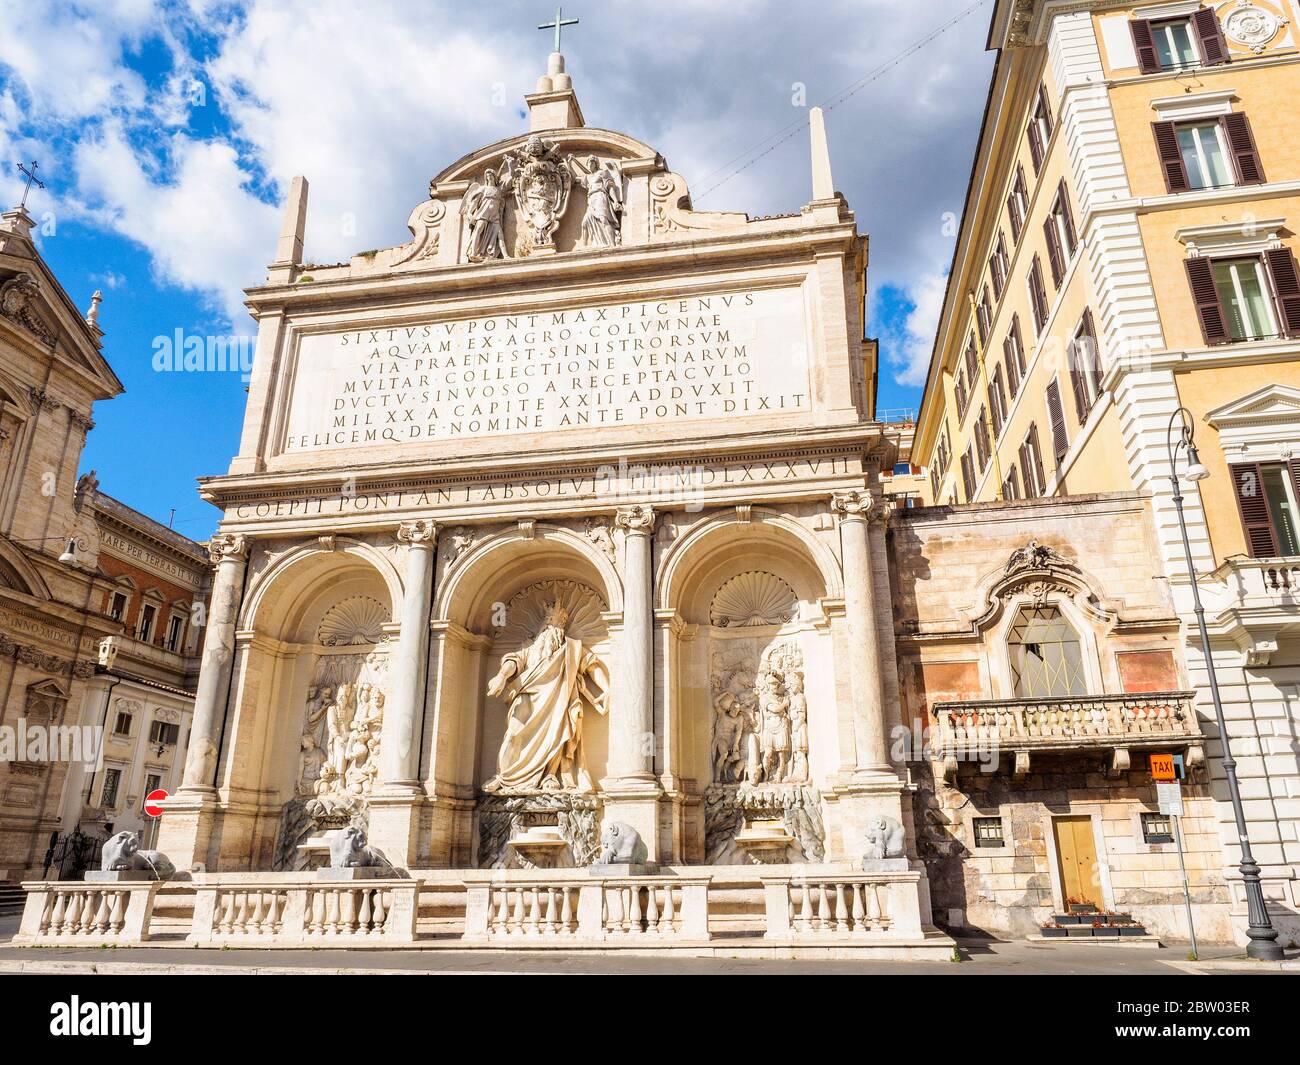 The Fontana dell'Acqua Felice, also called the Fountain of Moses. It marked  the terminus of the Acqua Felice aqueduct restored by Pope Sixtus V. It was  designed by Domenico Fontana and built